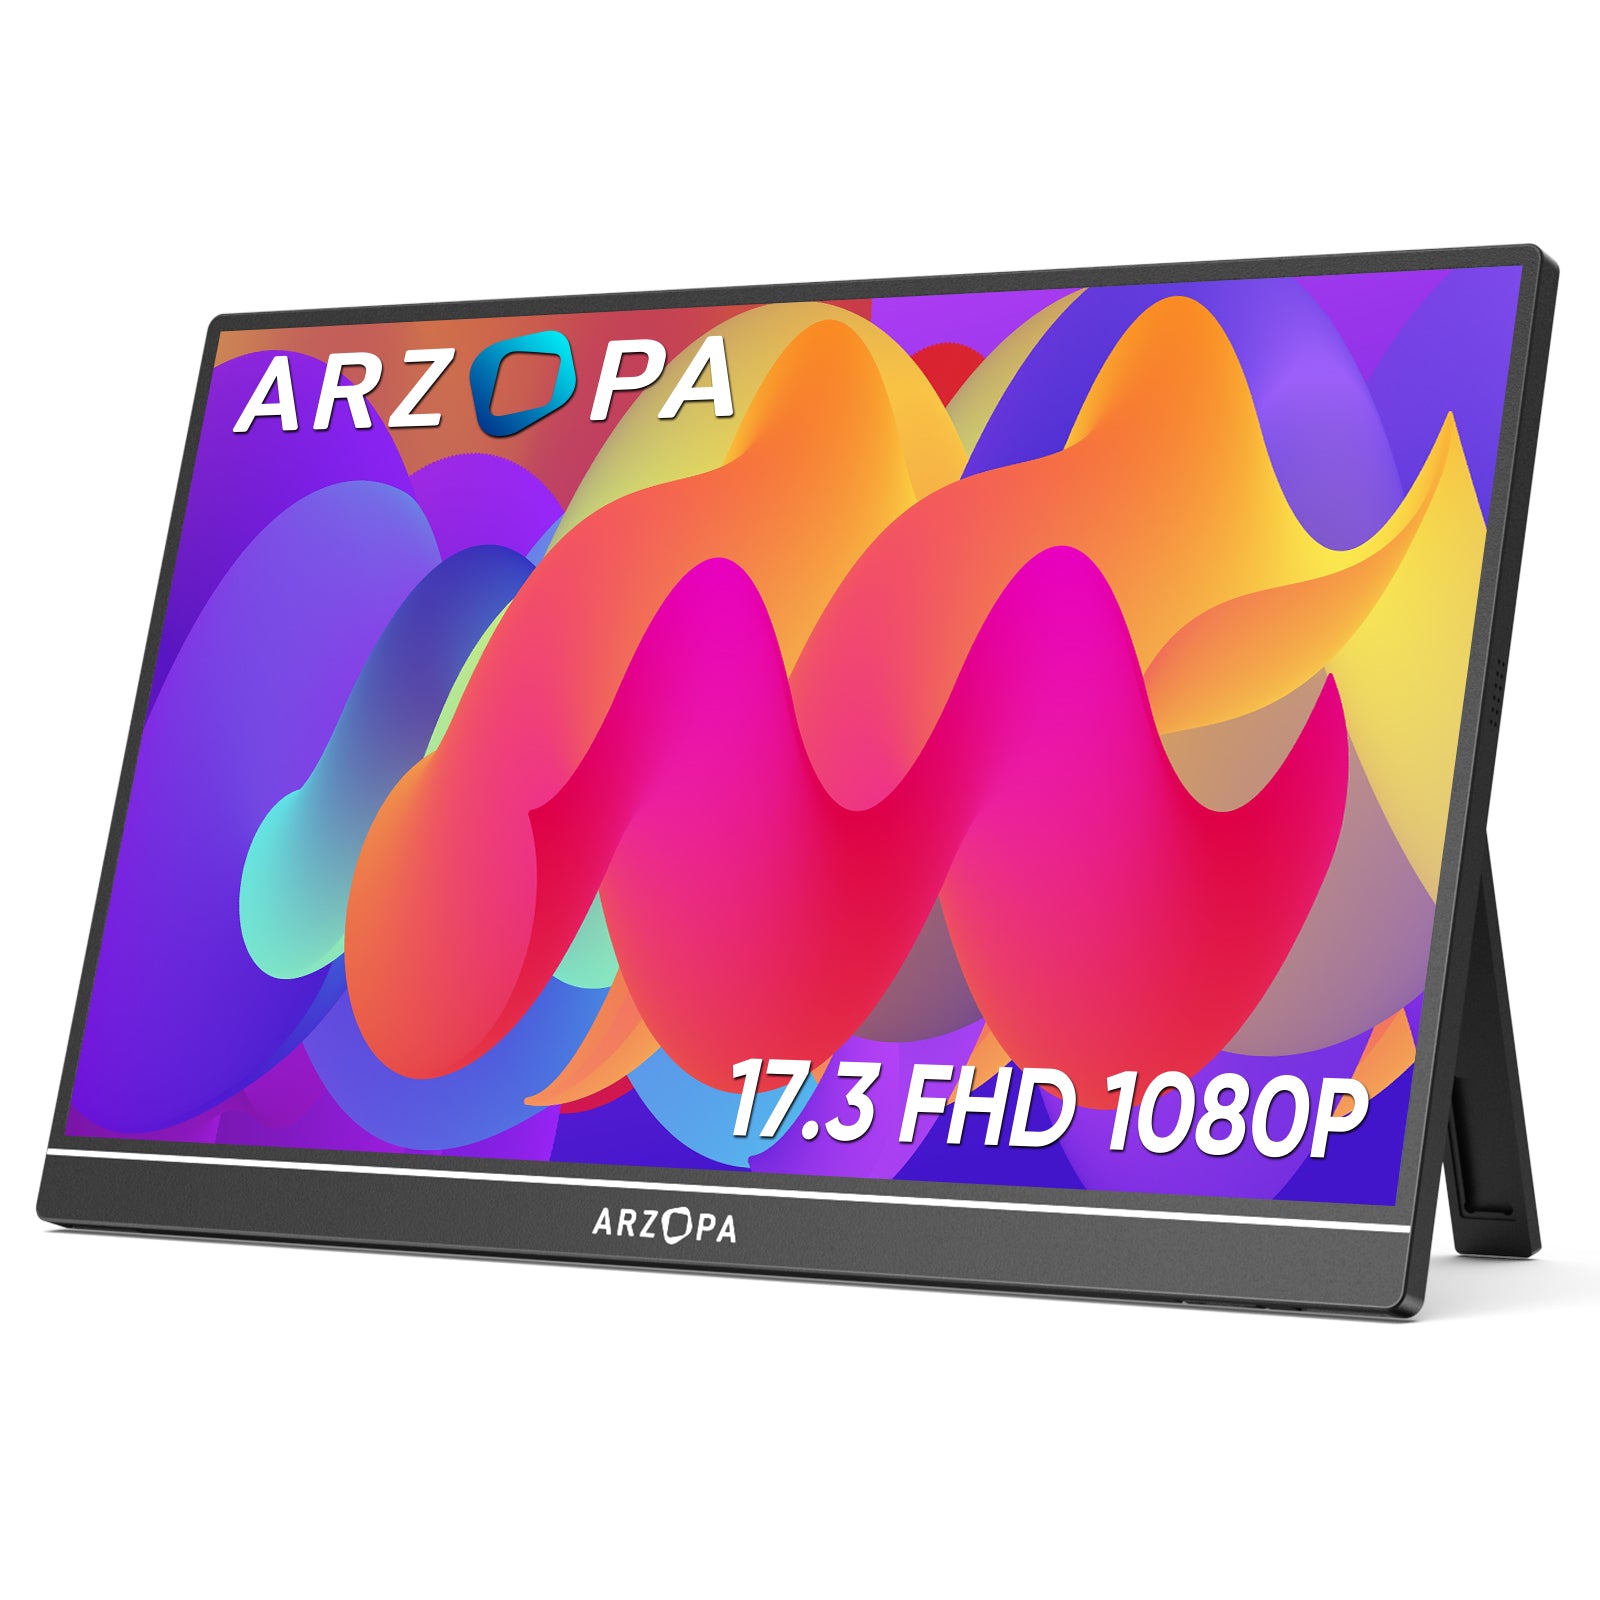 ARZOPA Portable Monitor, 14.0 Ultra Slim Portable Laptop Monitor FHD 1080P  External Display with Dual Speakers Second Screen for Laptop PC Phone Xbox